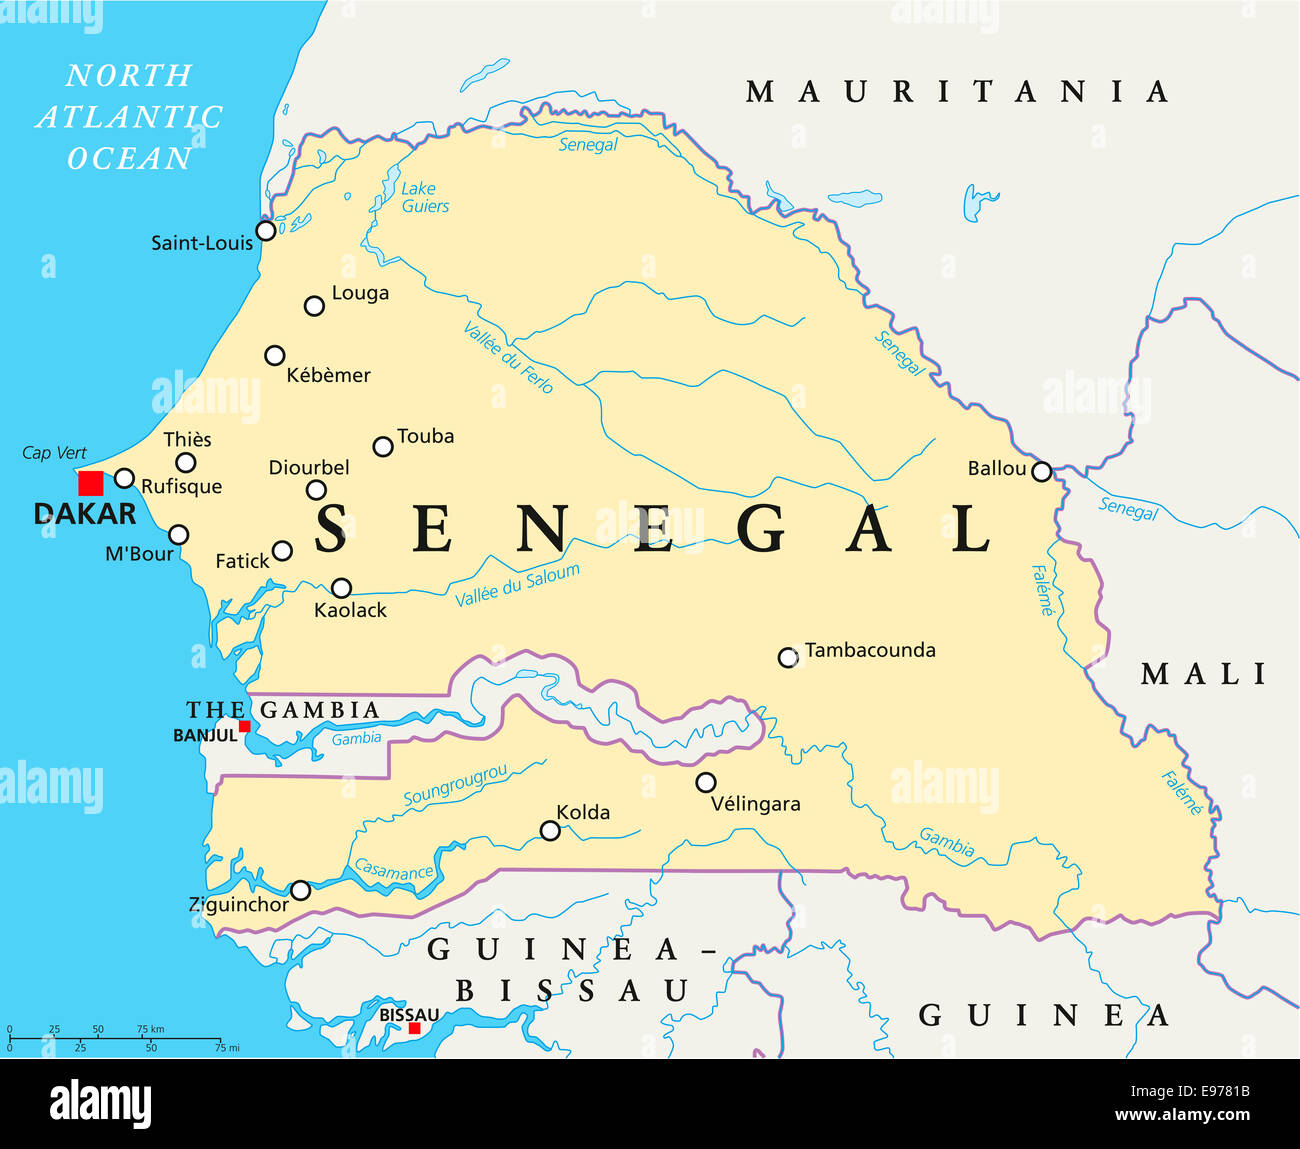 Senegal Political Map with capital Dakar, national borders, important cities, rivers and lakes. English labeling and scaling. Stock Photo